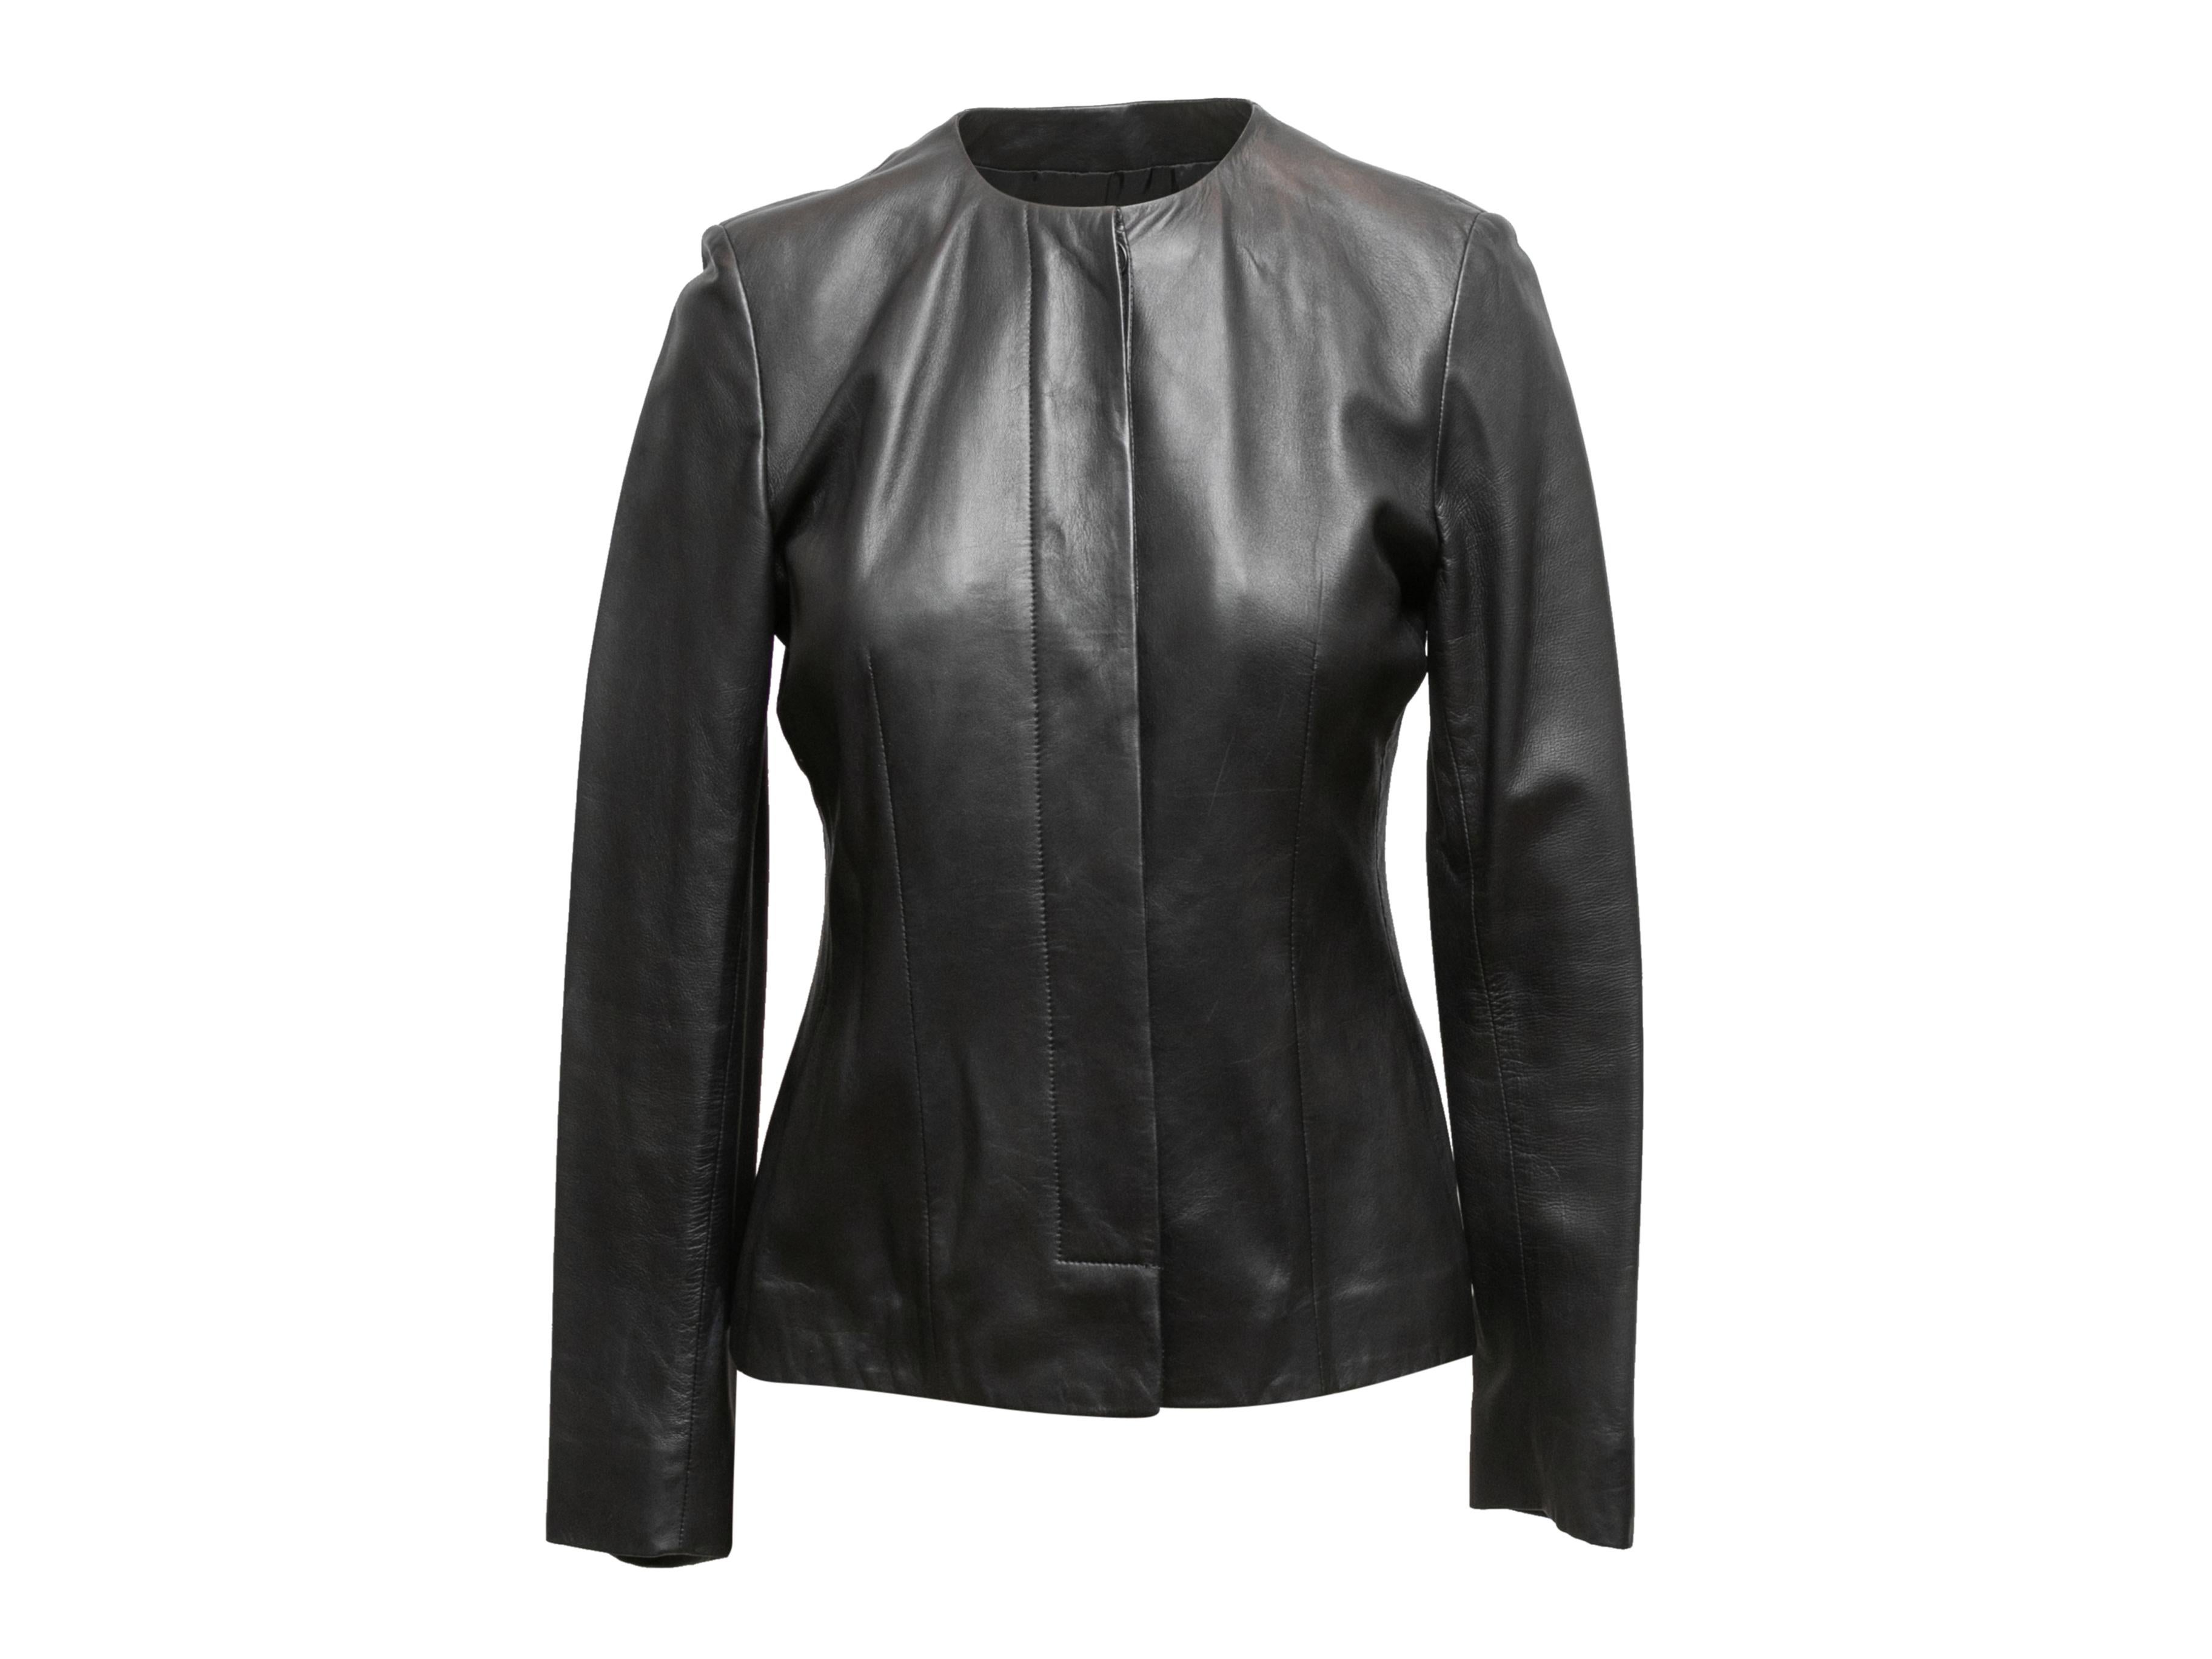 Black collarless leather jacket by Agnona. Crew neck. Concealed front button closures. 31